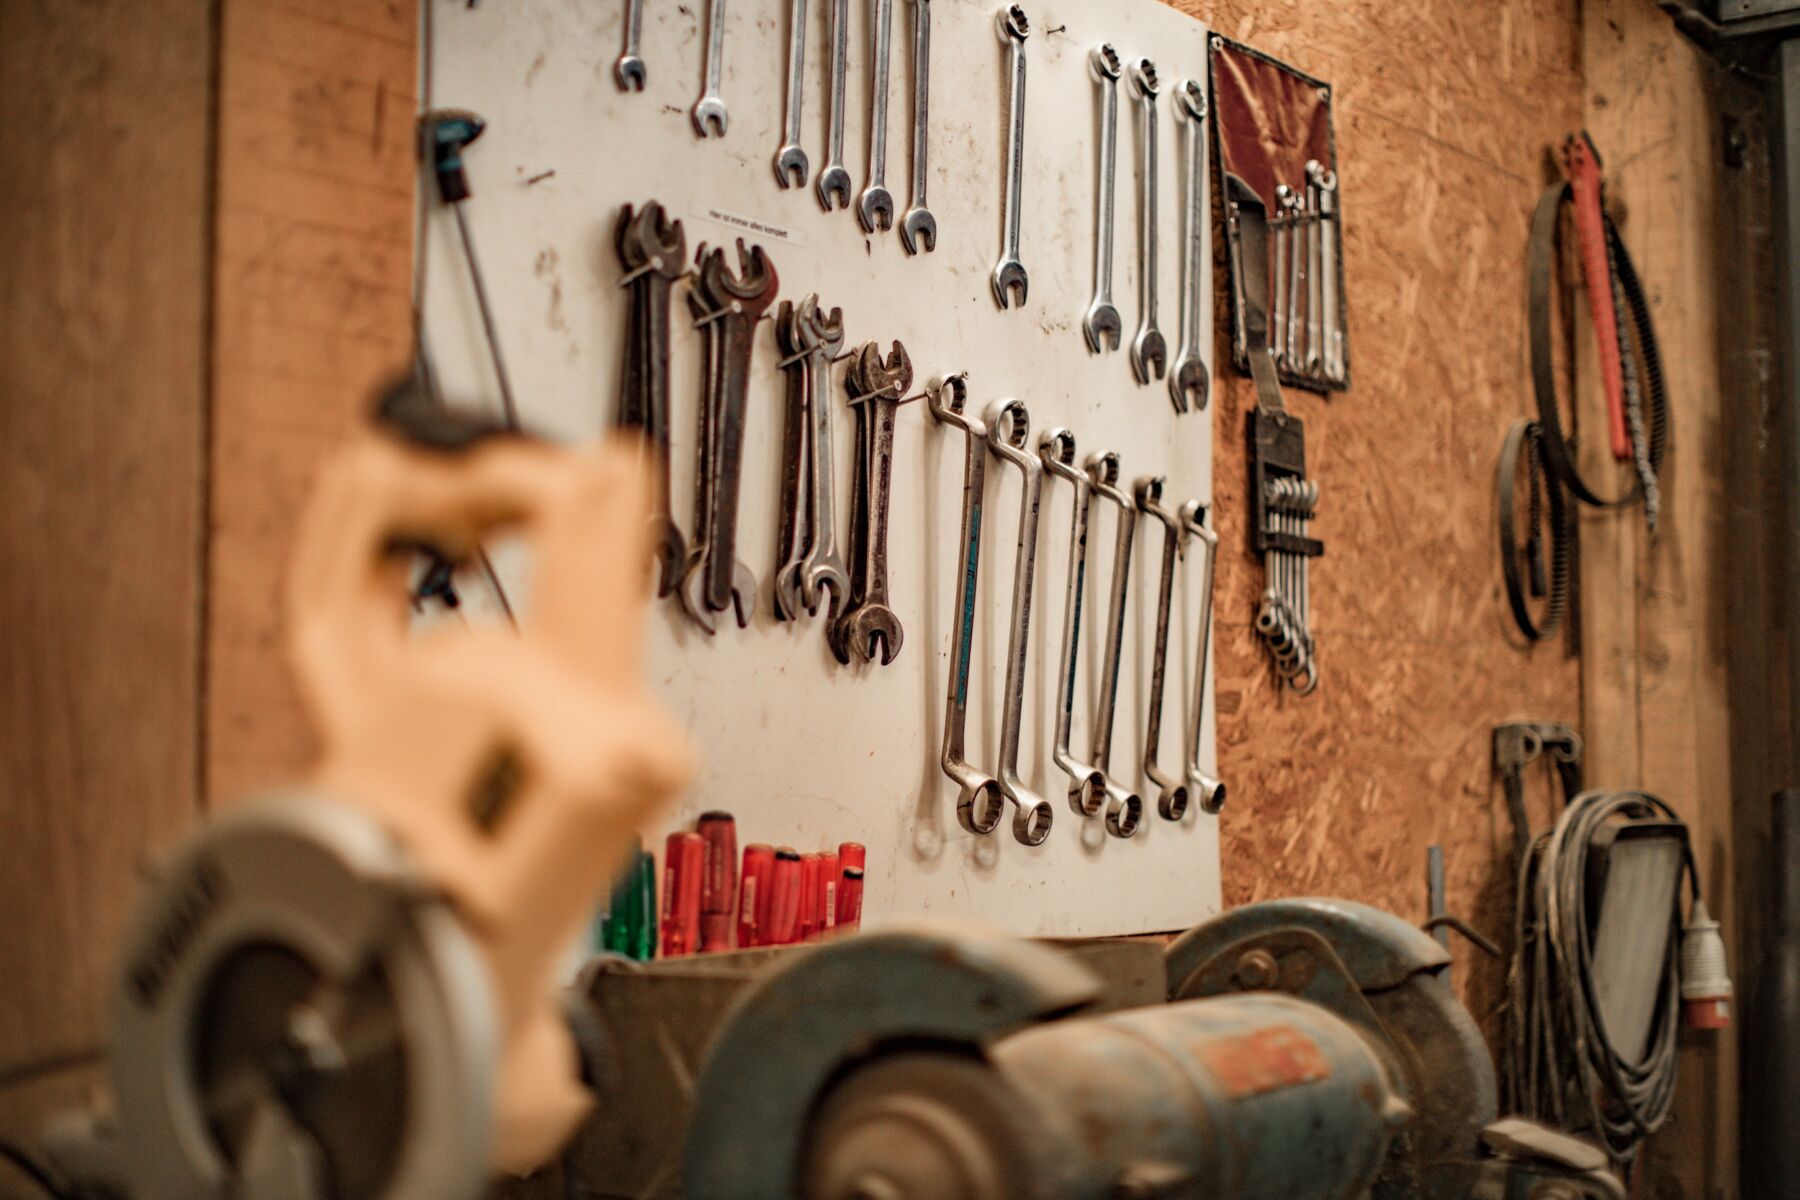 This is an image of a variety of handtools used for maintenance and repair of garage doors and gates.